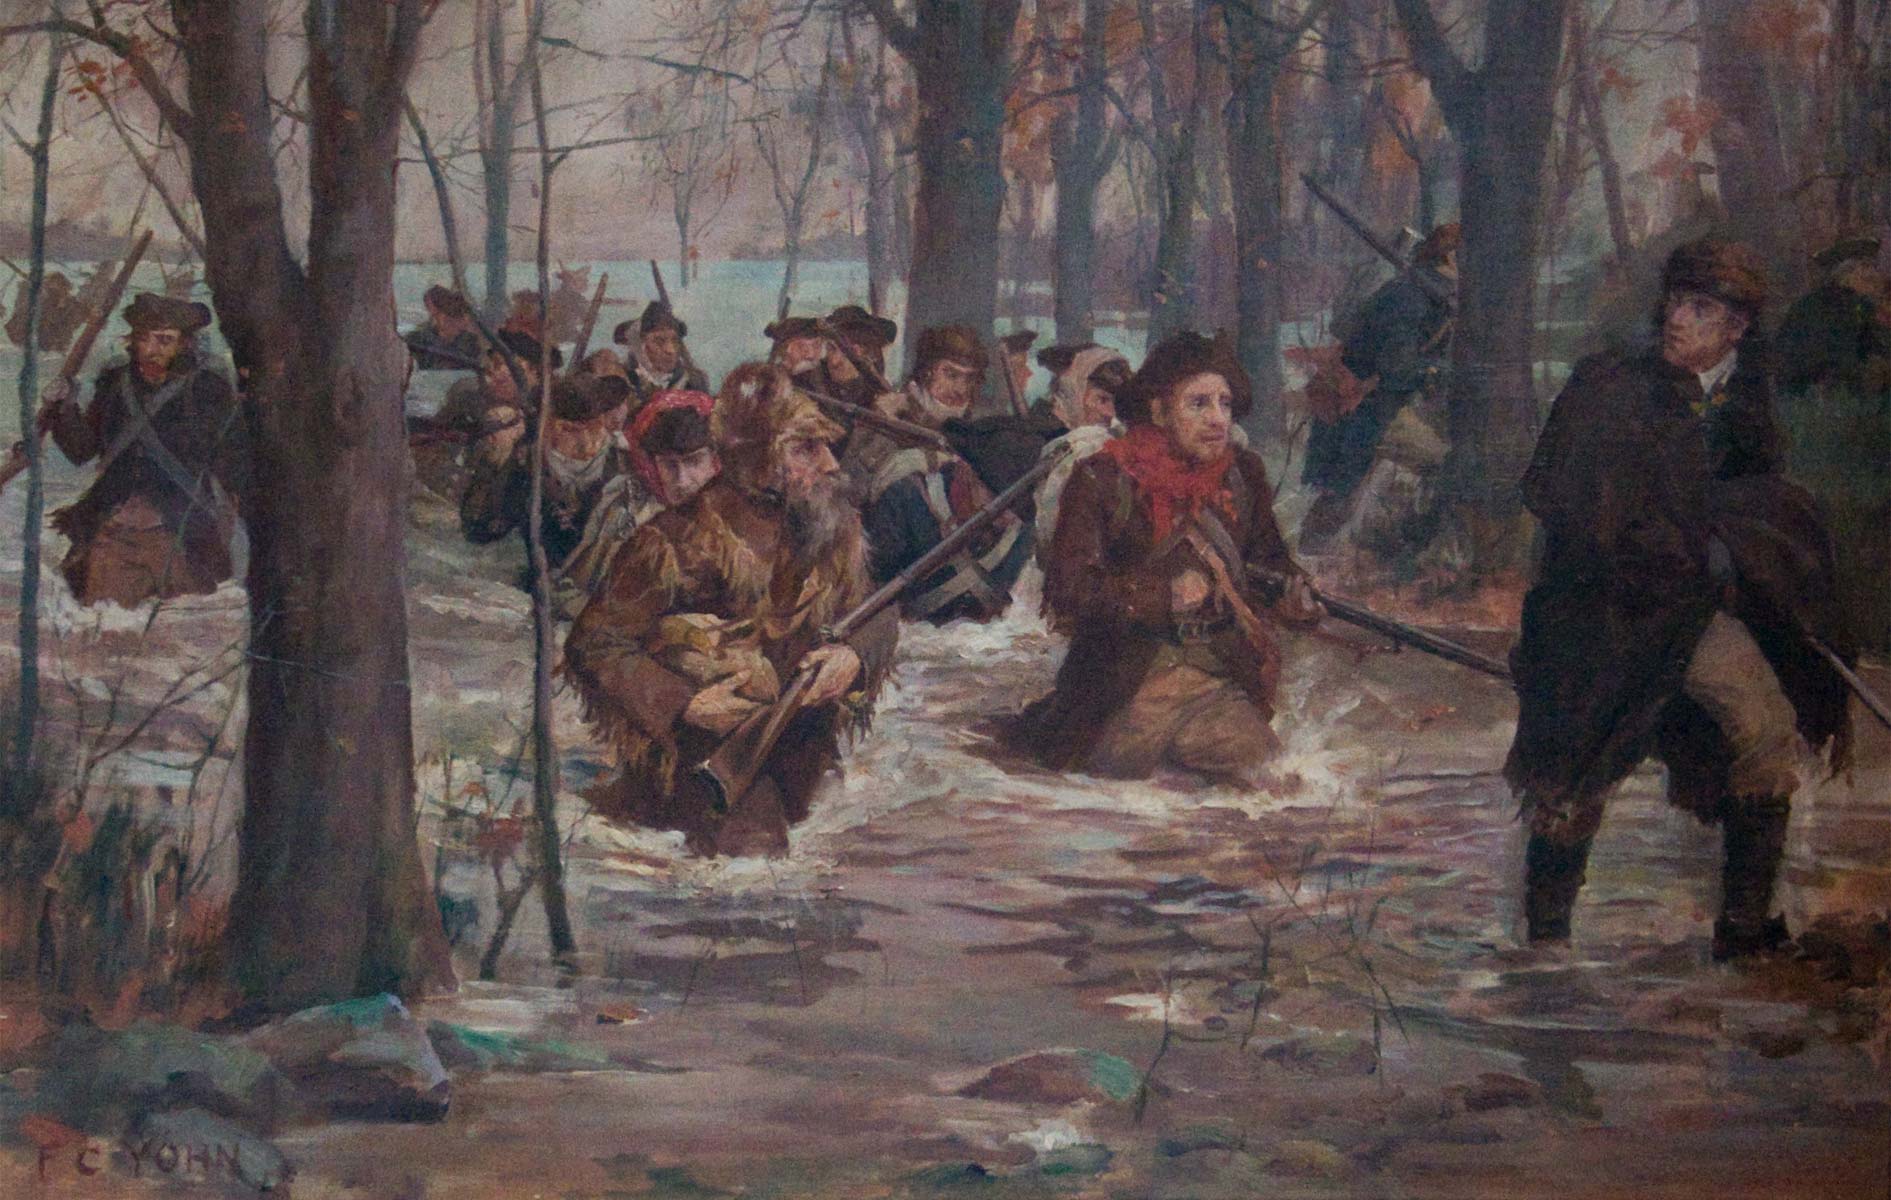 a 1898 color oil painting on canvas by F. C. Yohn of a battle during the Revolutionary War. Soldiers travelled across Horse Shoe Plain, four miles of wading in water, sometimes breast high.